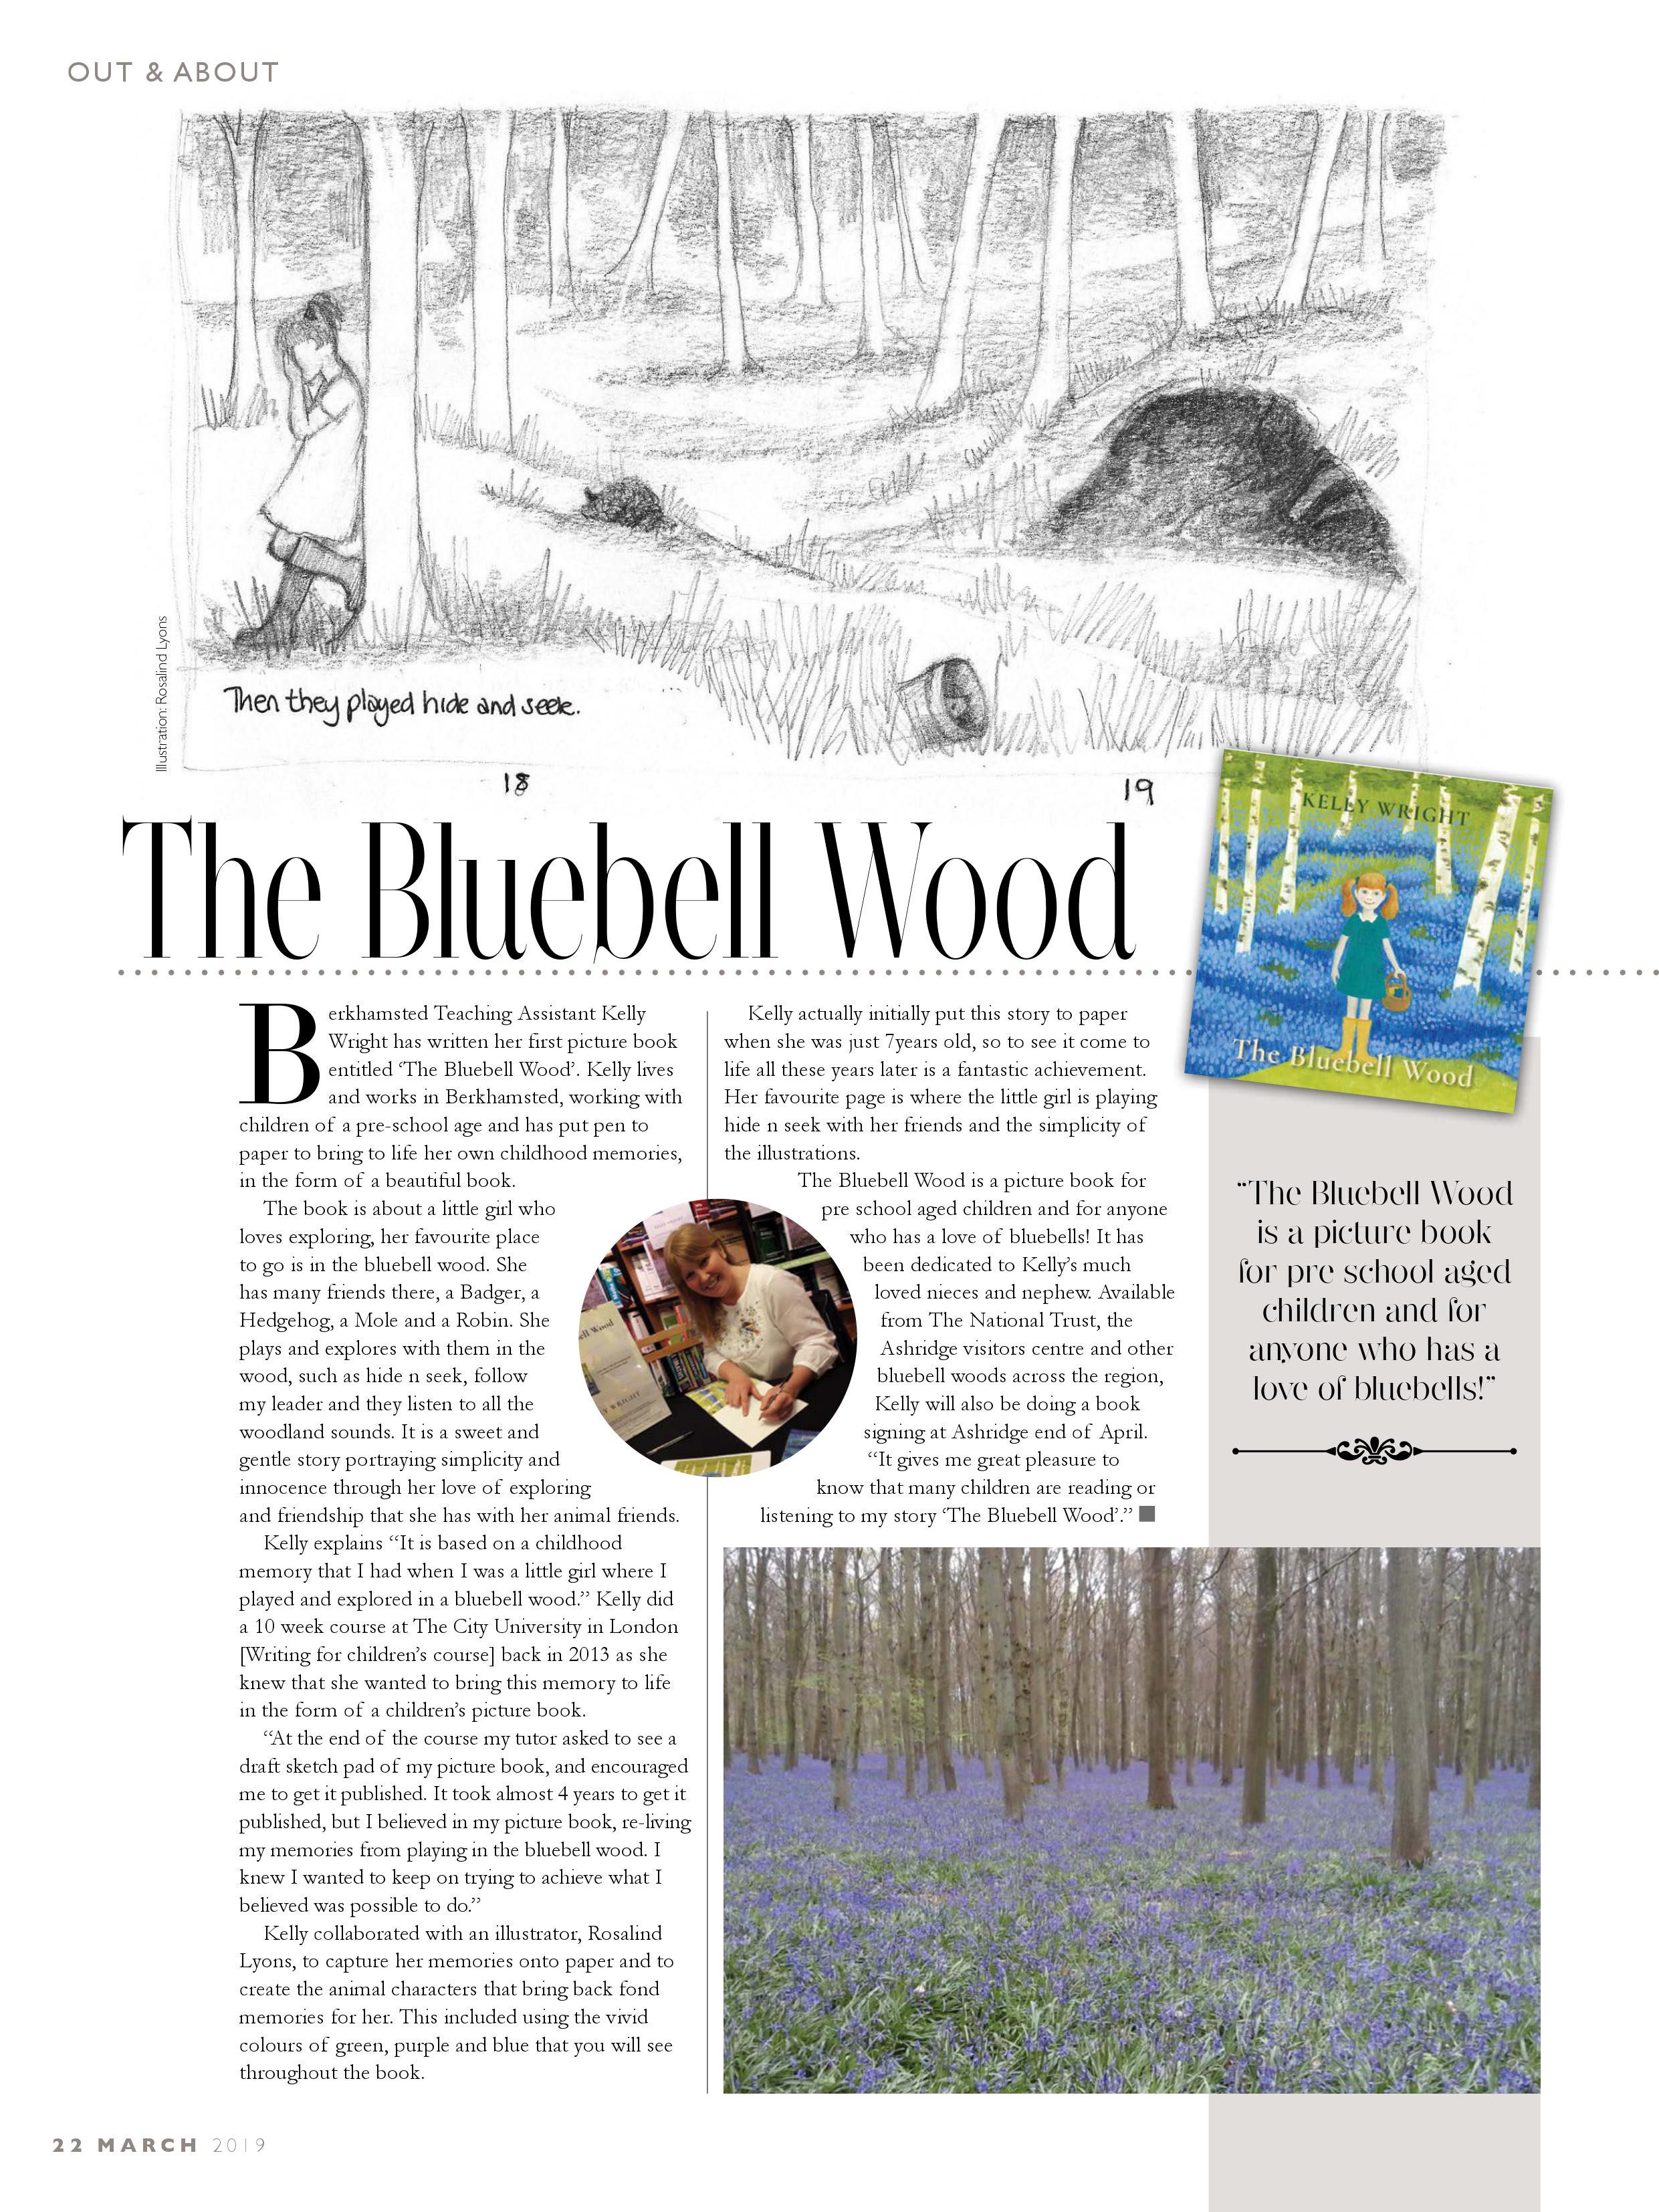 The Bluebell Wood by Kelly Wright Featured in Berkhamsted Life Magazine